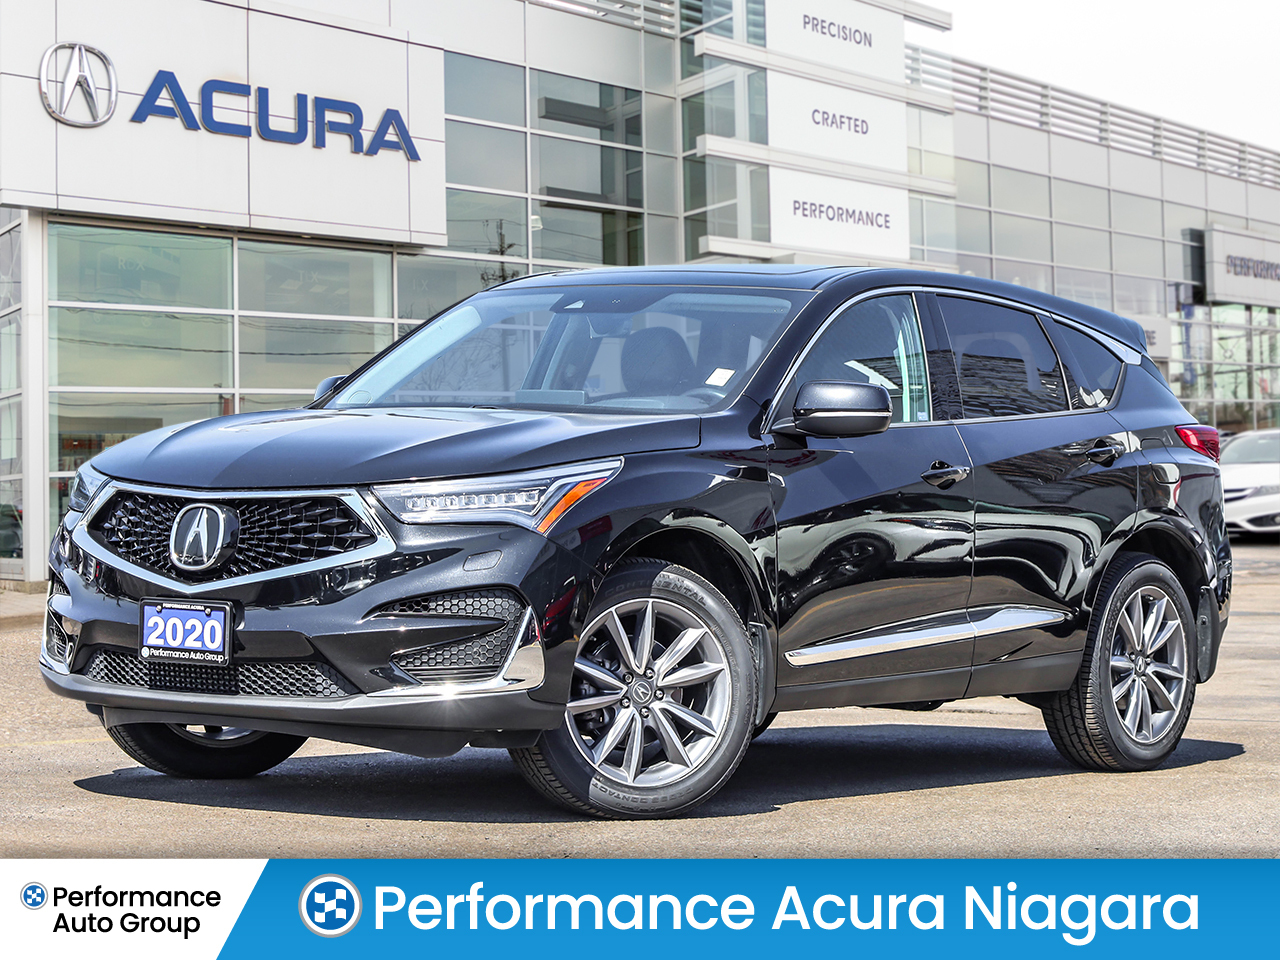 2020 Acura RDX SOLD - PENDING DELIVERY